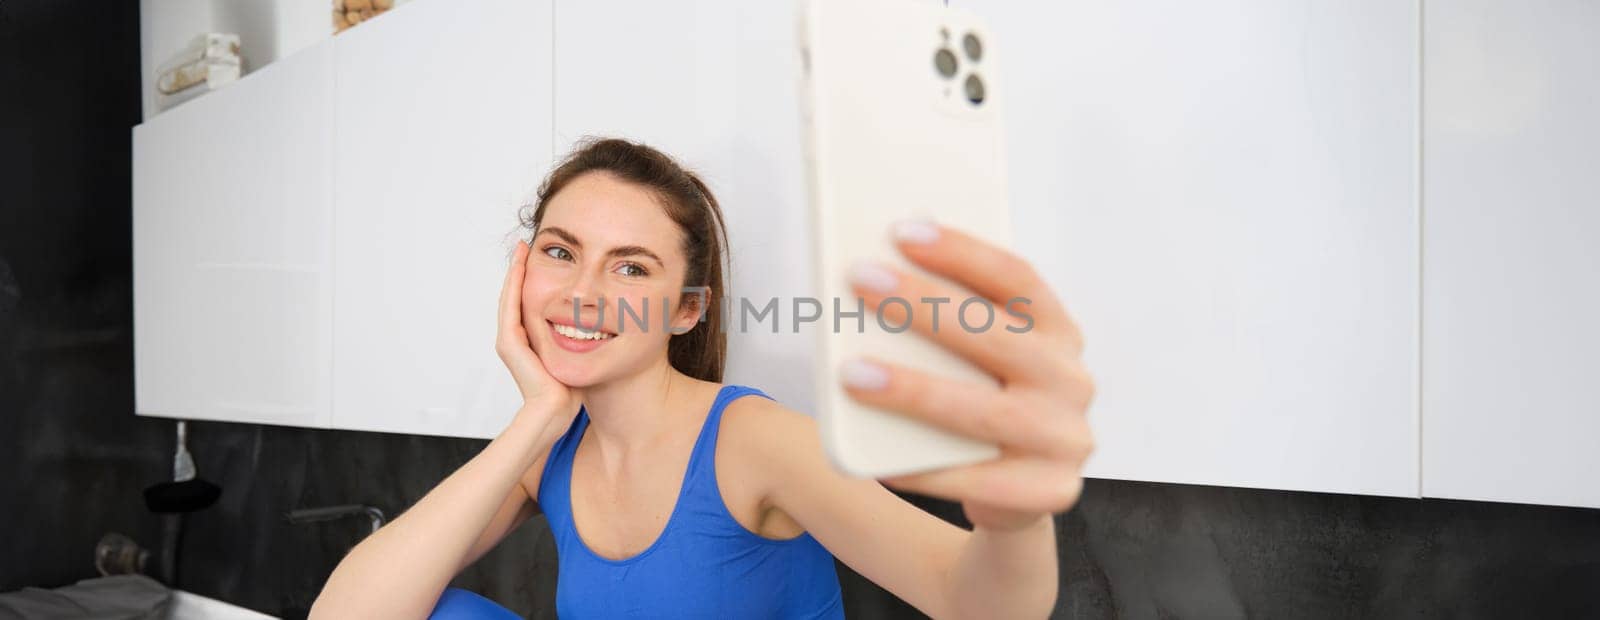 Portrait of fitness girl posing for photo, taking selfie on smartphone app, sitting in kitchen, wearing activewear.